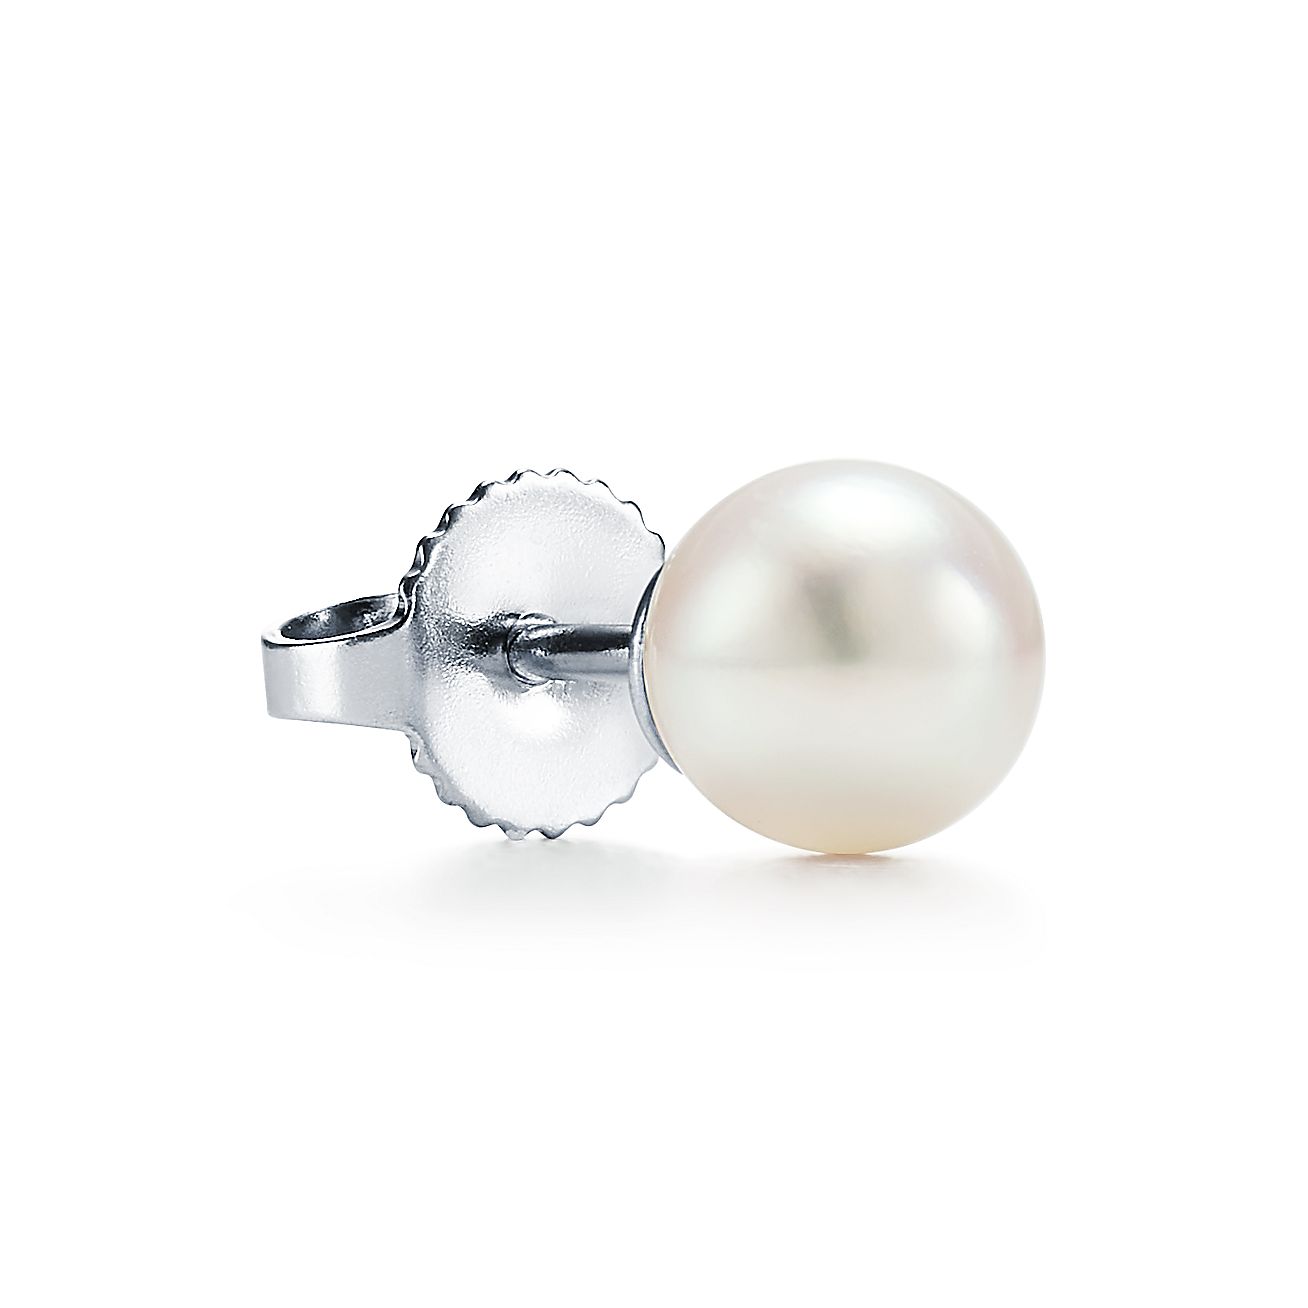 Tiffany Signature™ Pearls earrings in 18k white gold with pearls